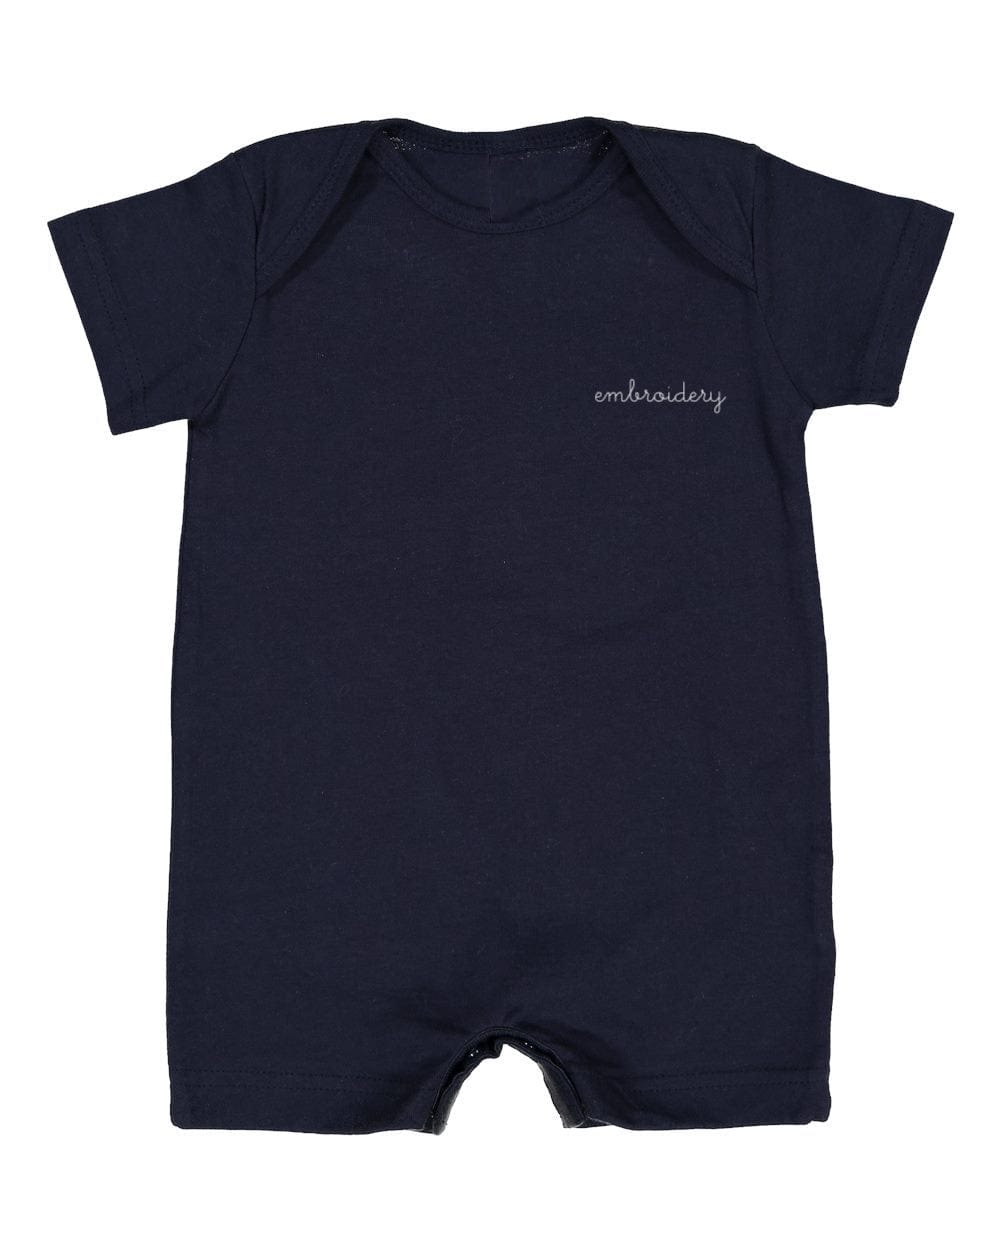 juju + stitch Personalized Custom Embroidered Dress 6M / Navy Baby Cotton Romper Baby Gift